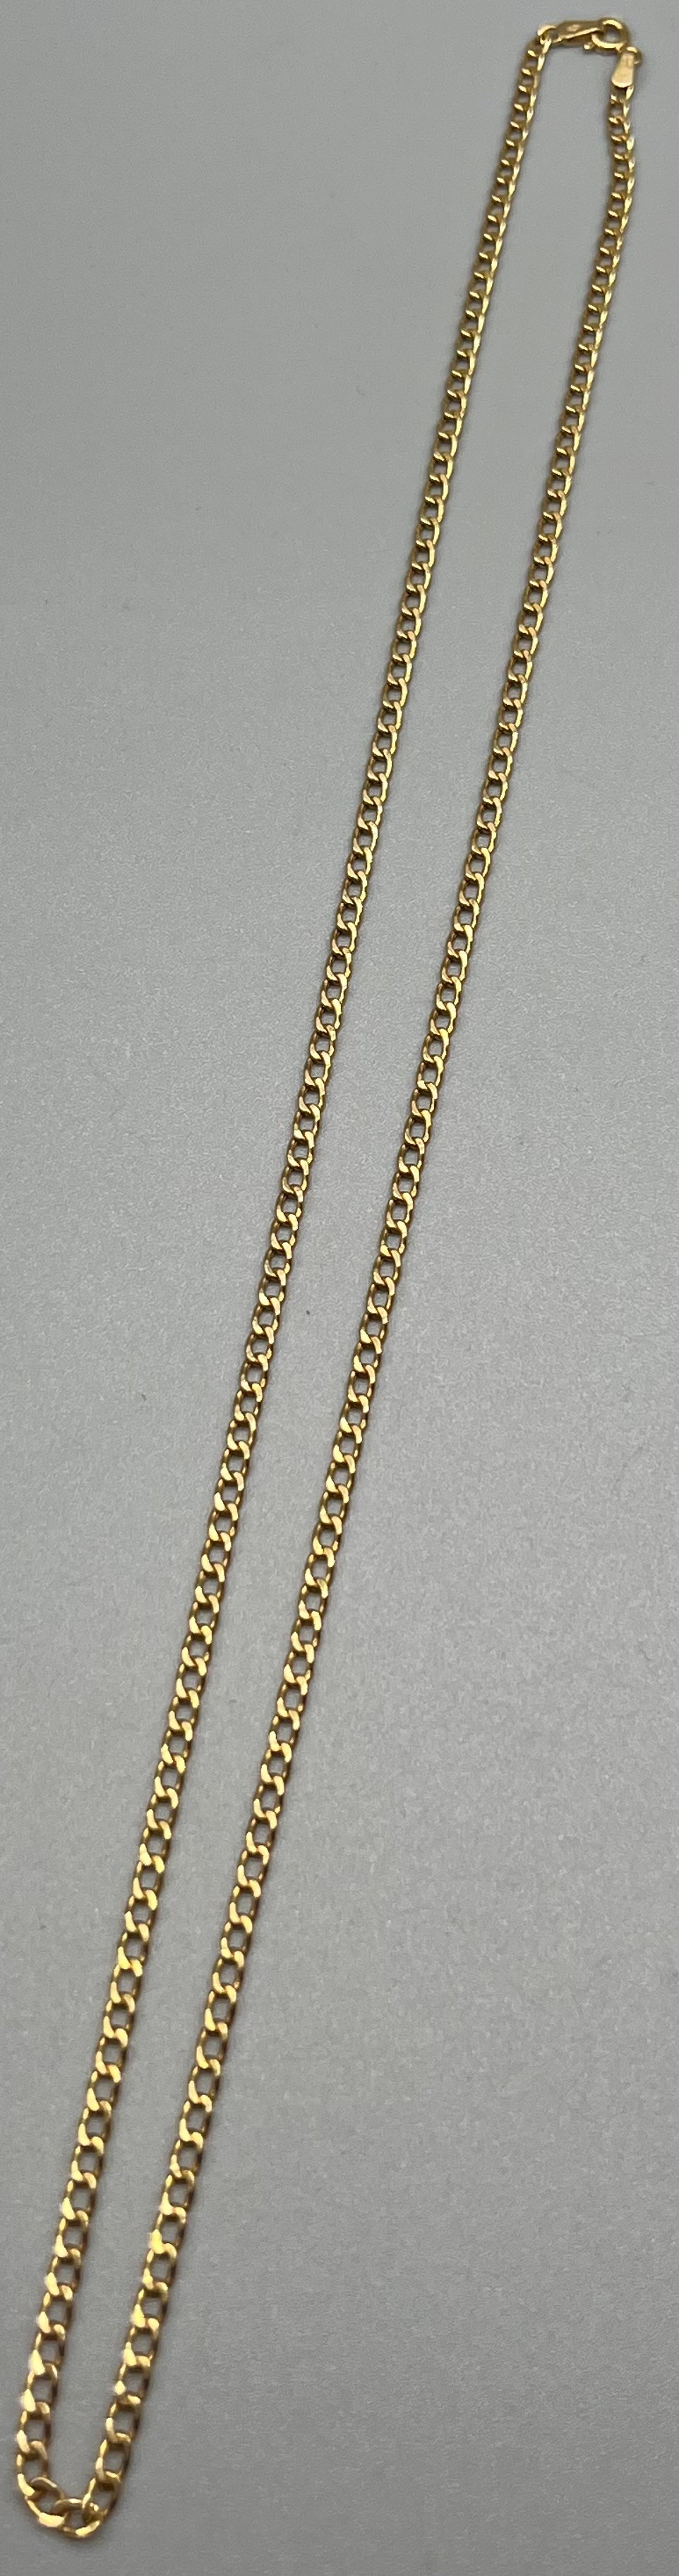 9ct yellow gold curb necklace. [2.91 grams] [27cm drop]